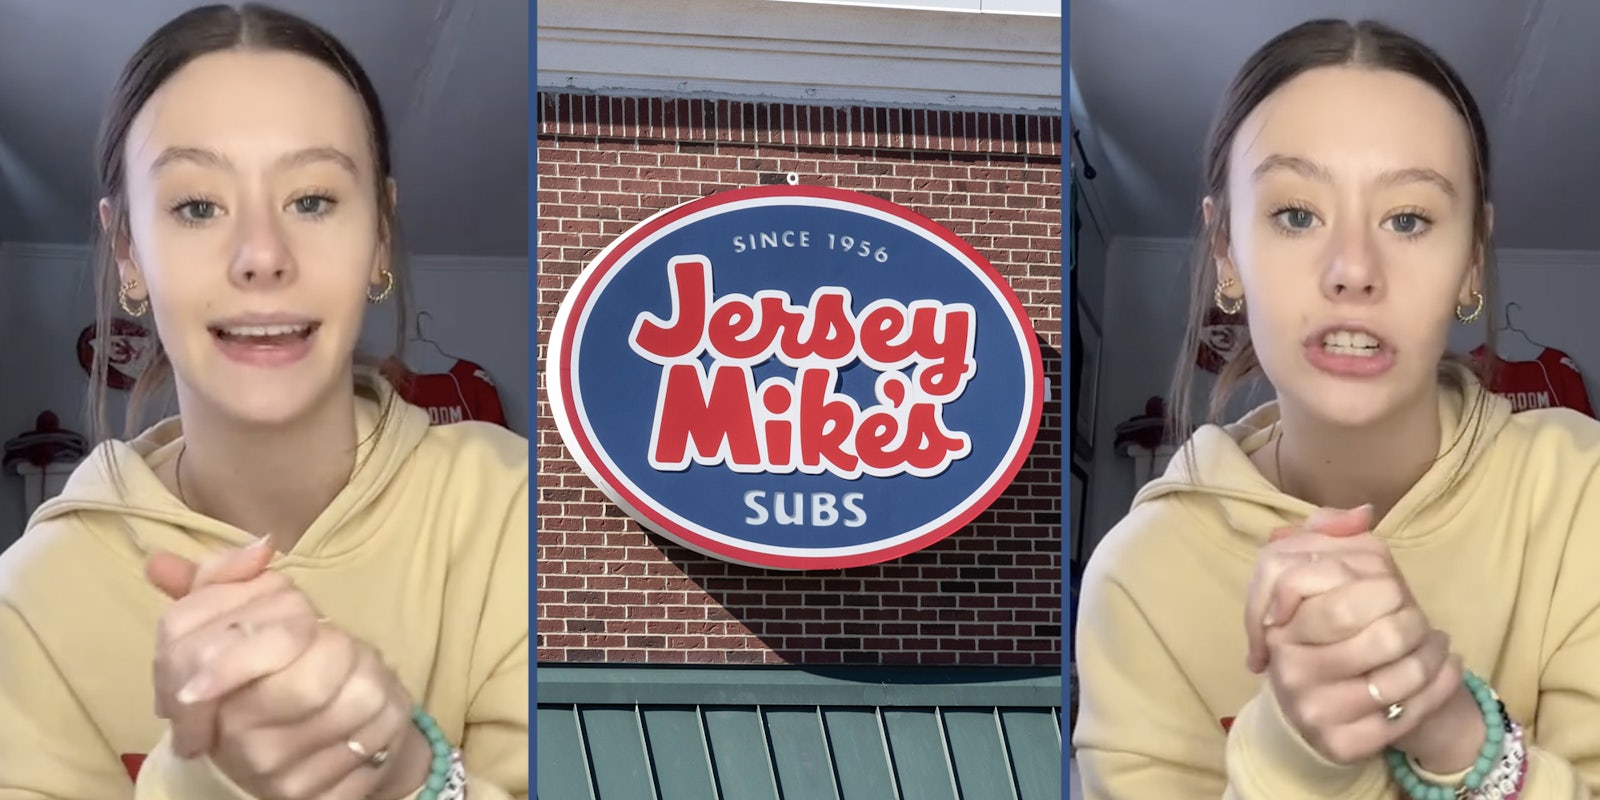 Woman talking(l+r), Jersey Mike's subs(c)